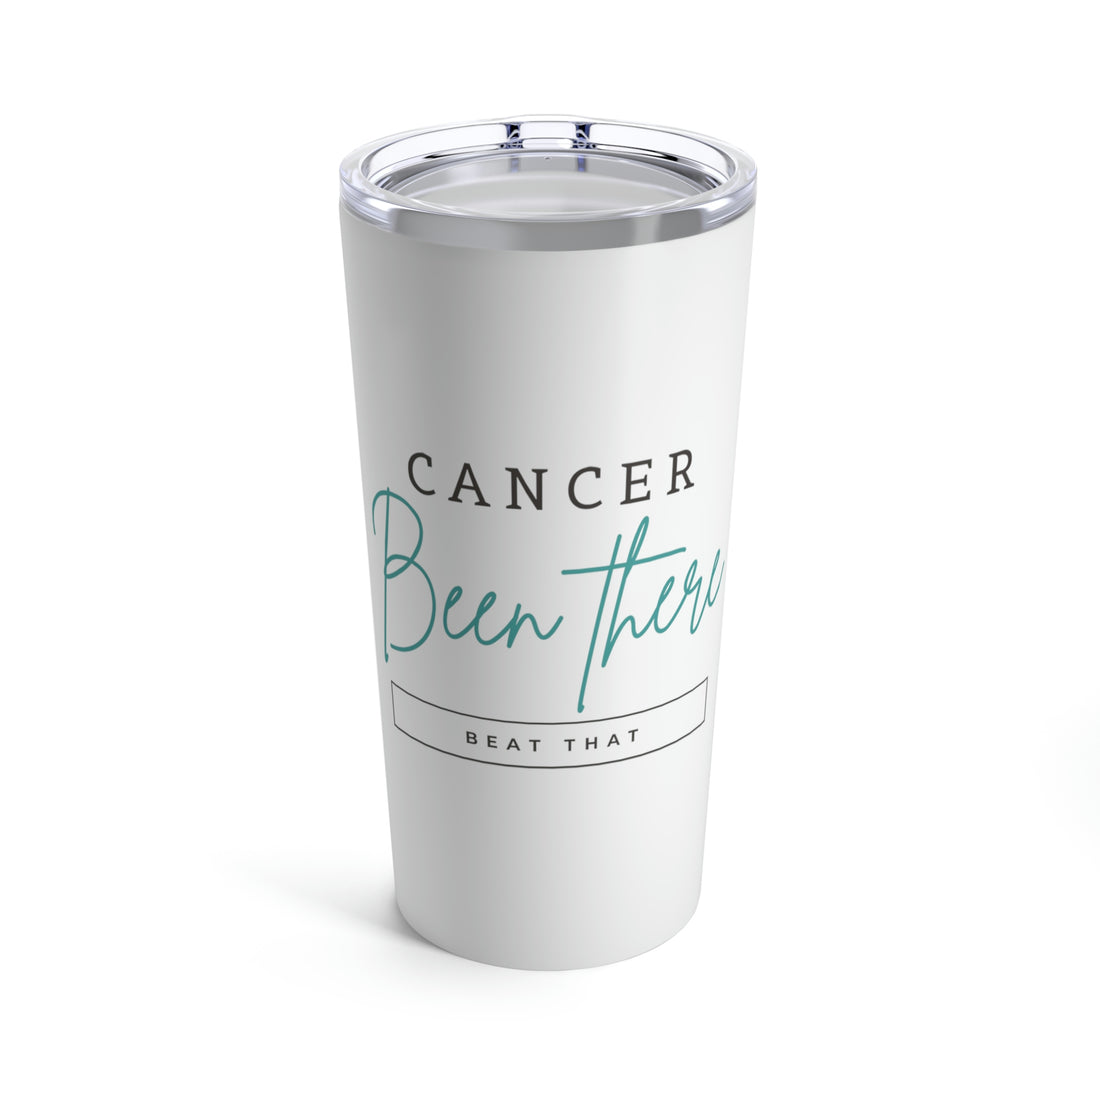 Cancer Been There Beat That - White Tumbler 20oz